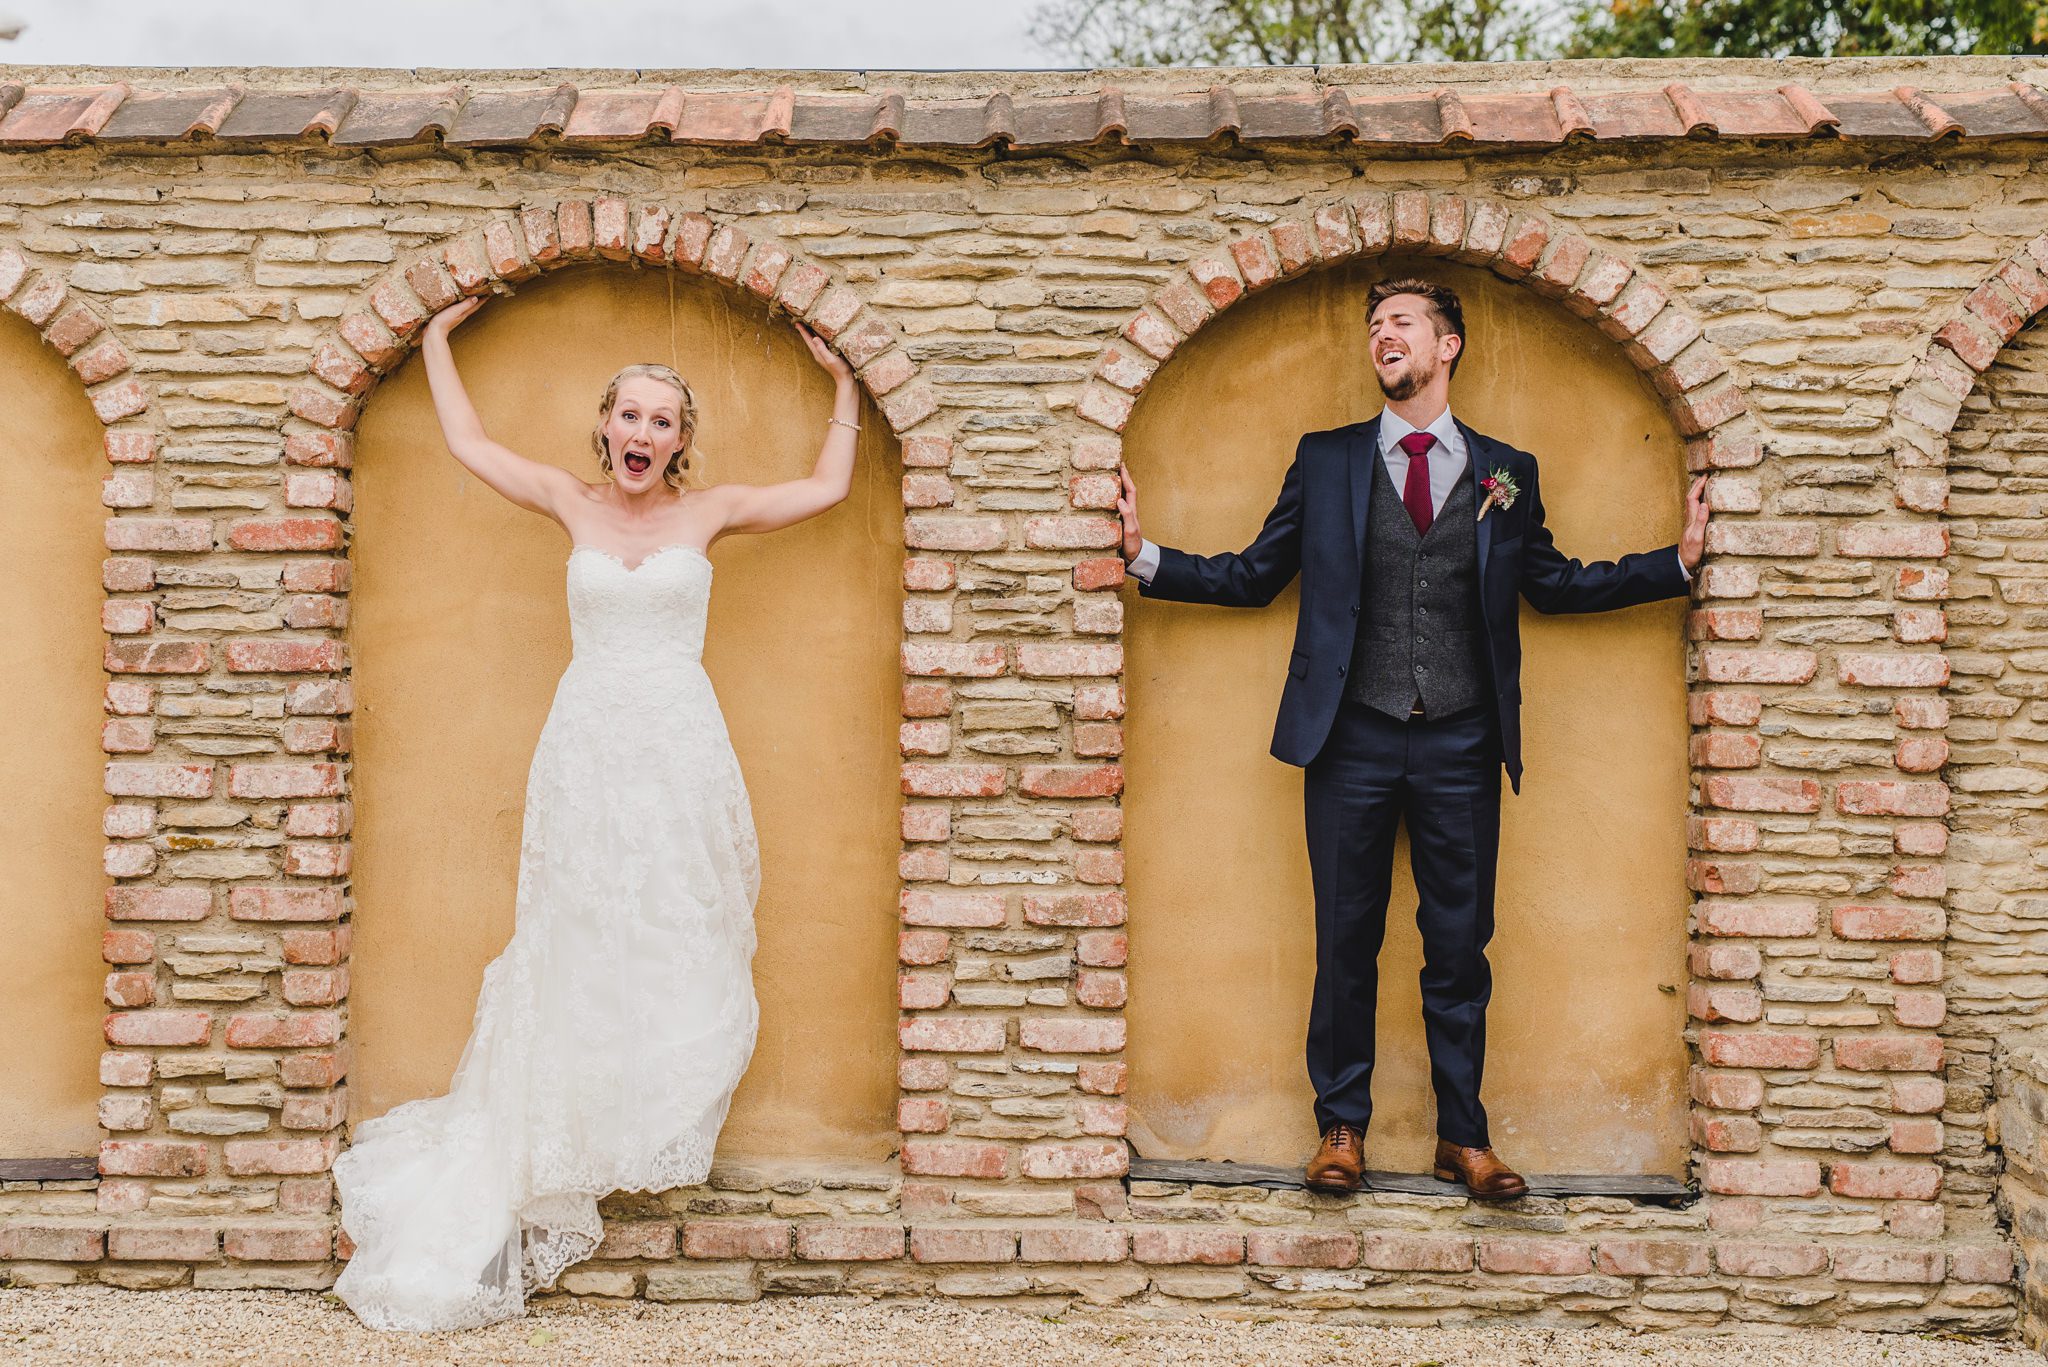 Fun wedding photo of a bride and groom standing in an alcove